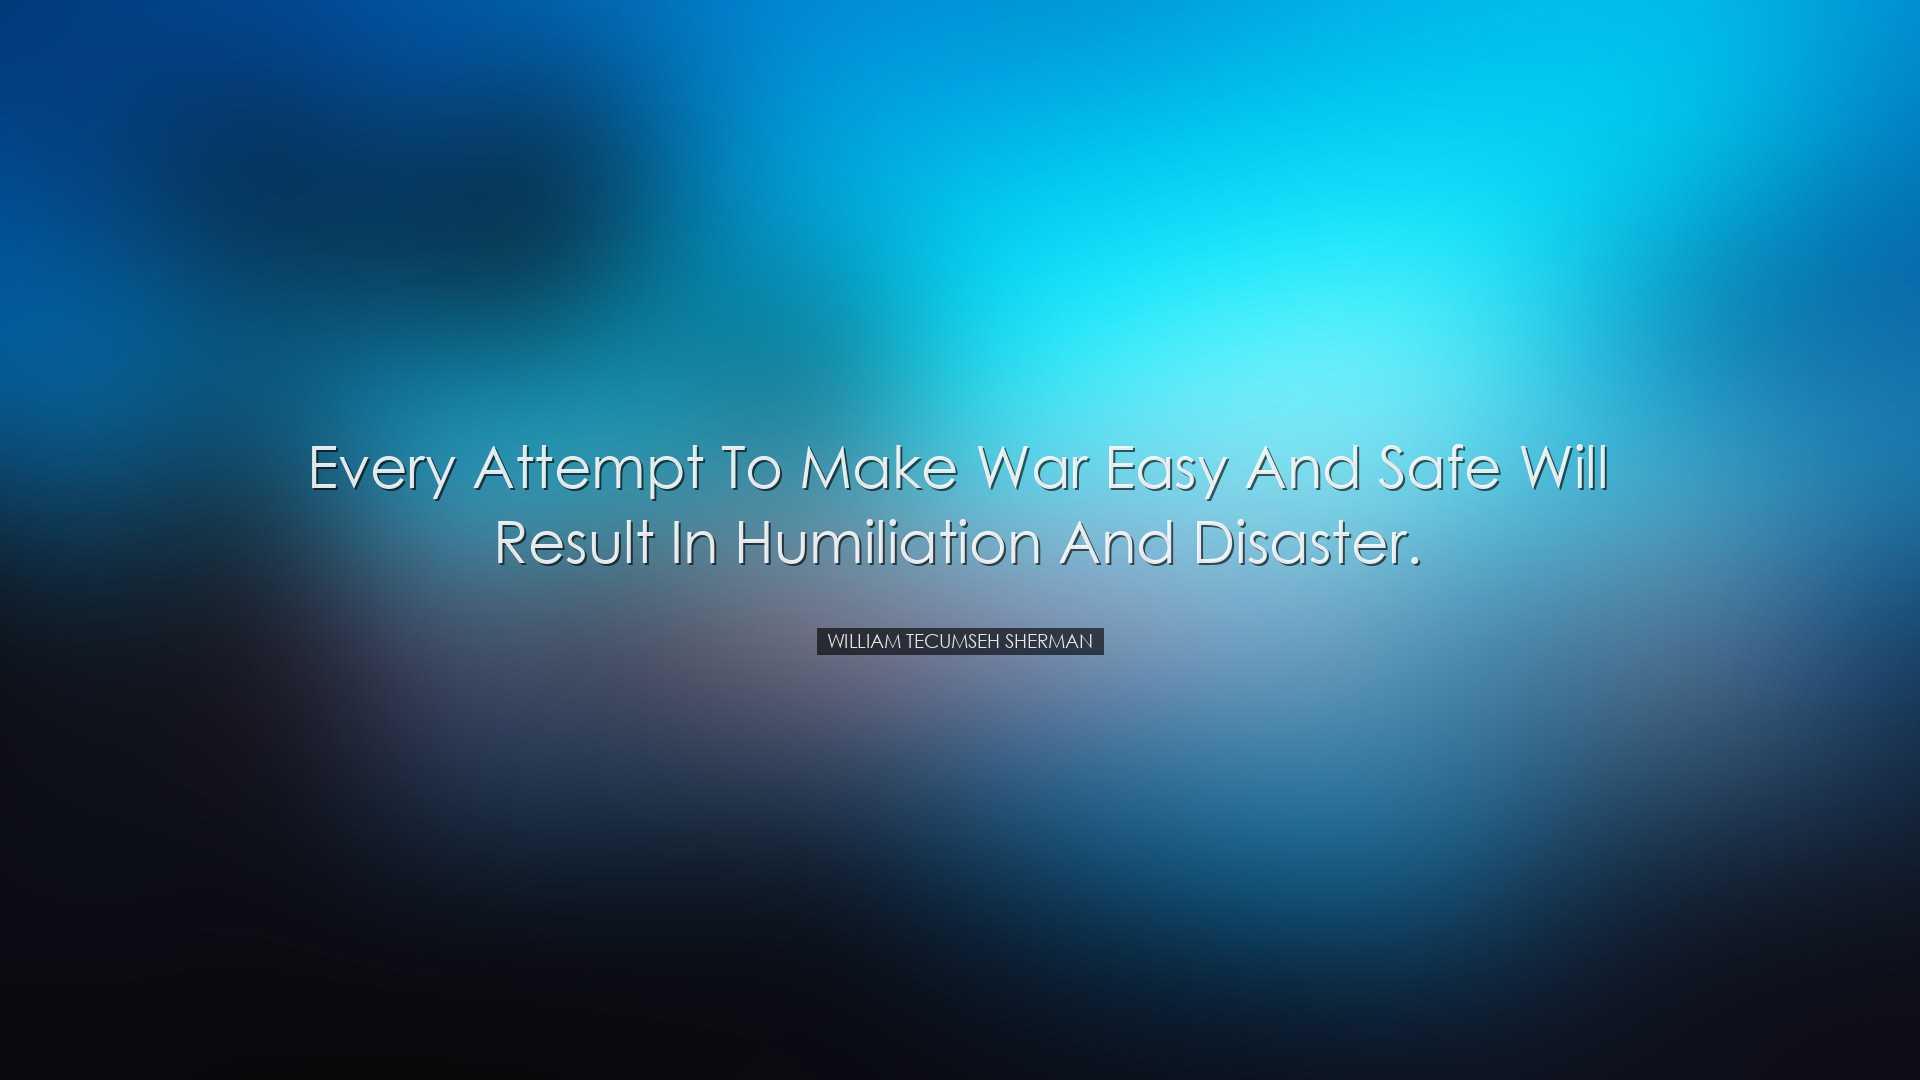 Every attempt to make war easy and safe will result in humiliation